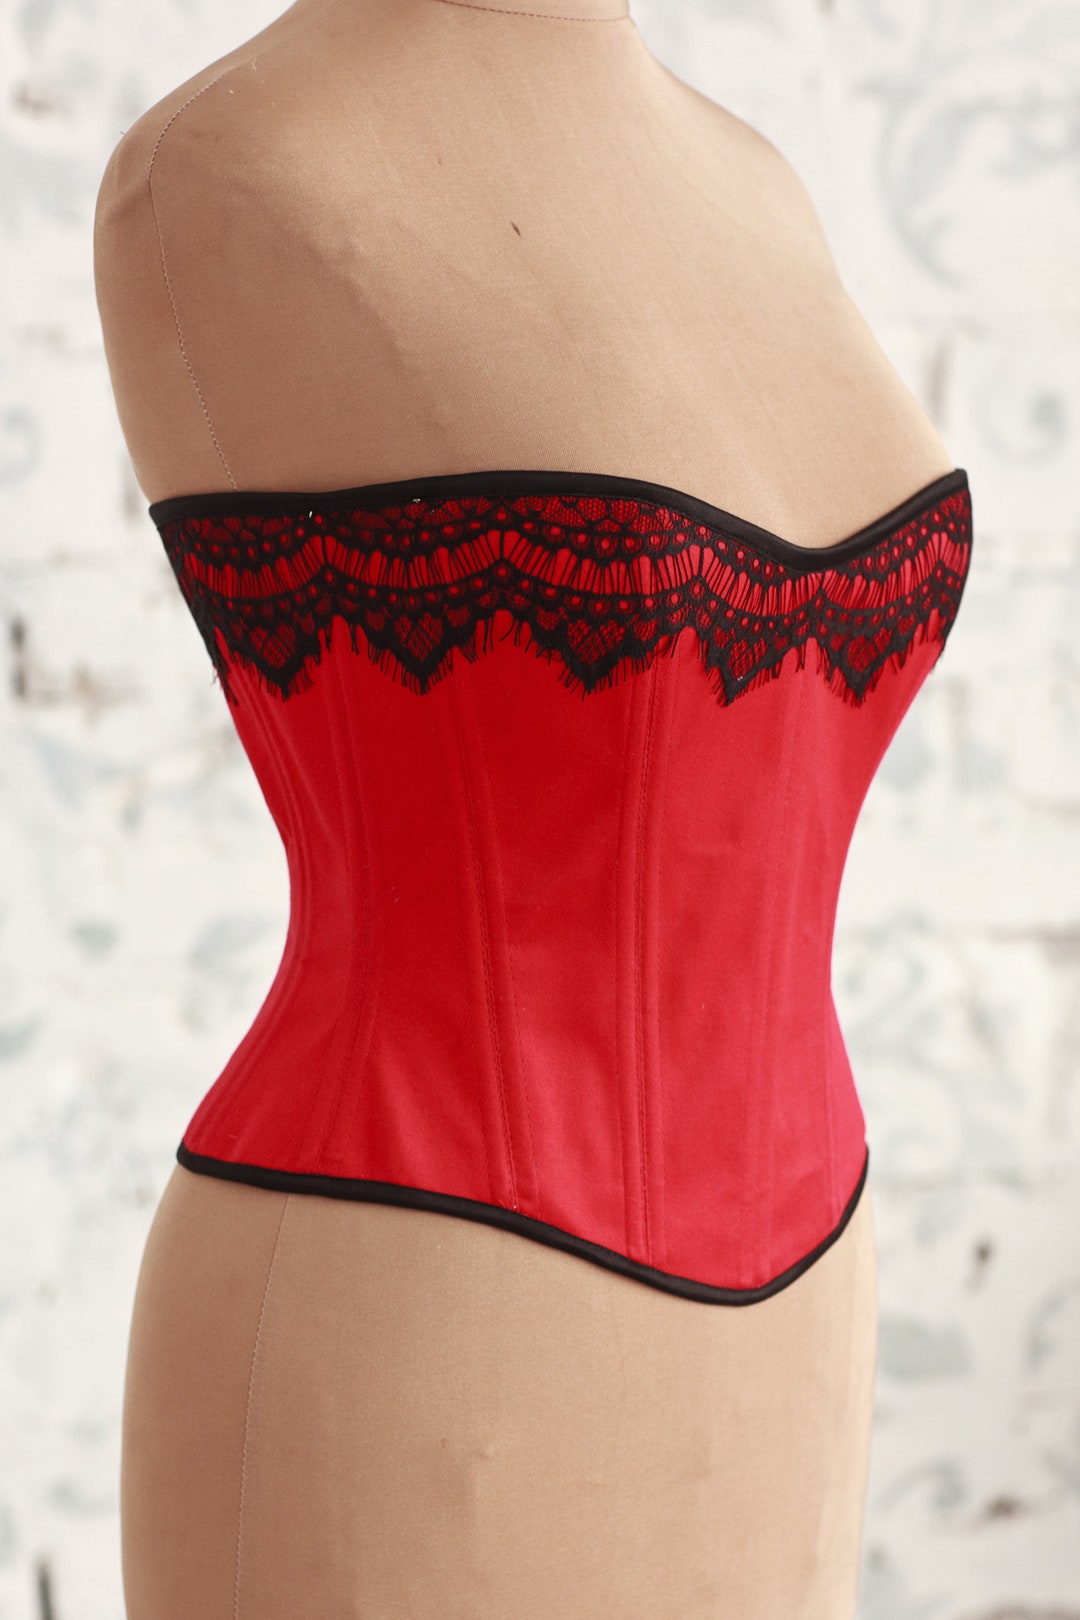 underwear Archives - Bra-makers Supply the leading global source for bra  making and corset making supplies